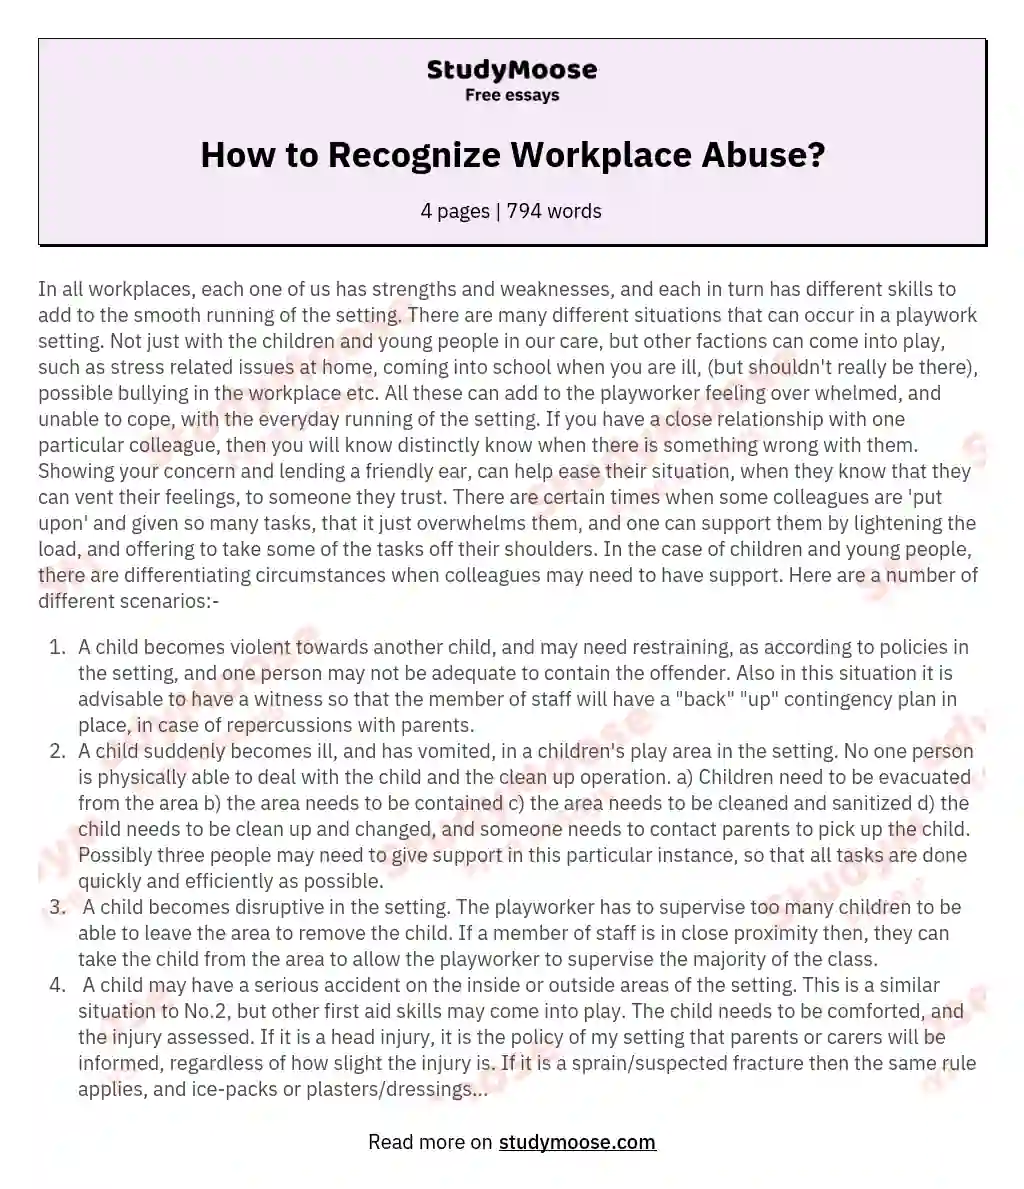 How to Recognize Workplace Abuse?